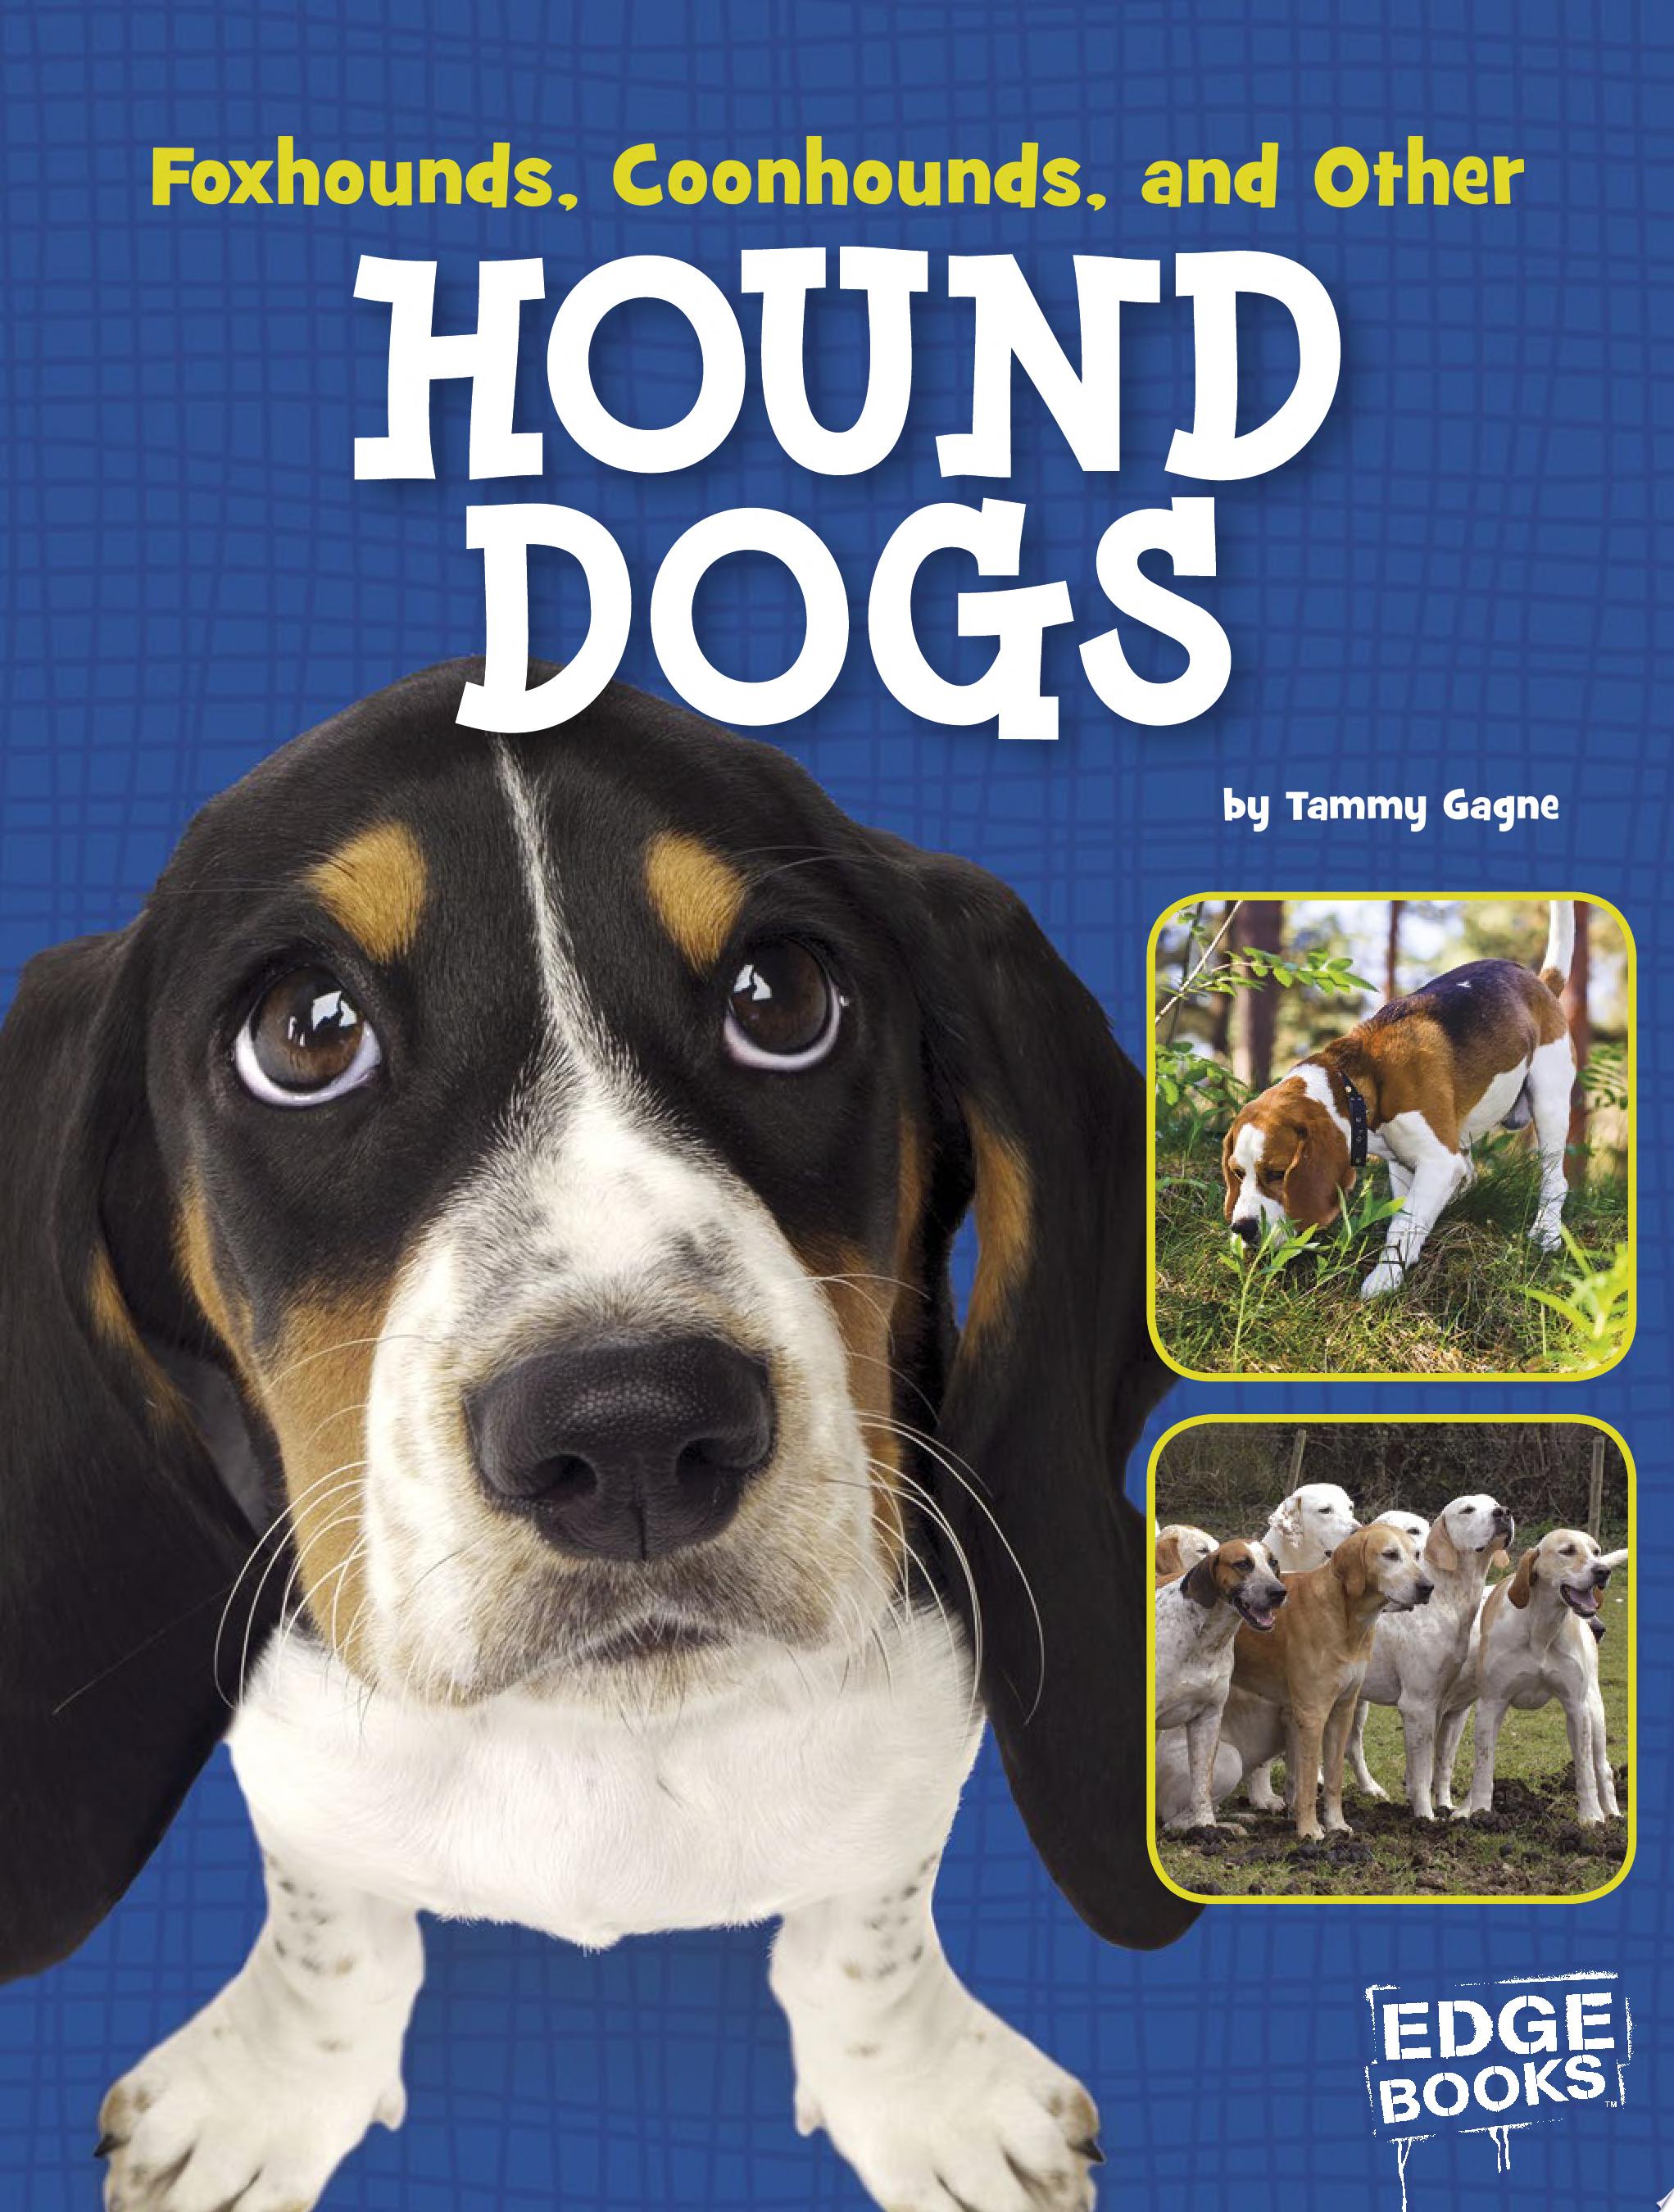 Image for "Foxhounds, Coonhounds, and Other Hound Dogs"